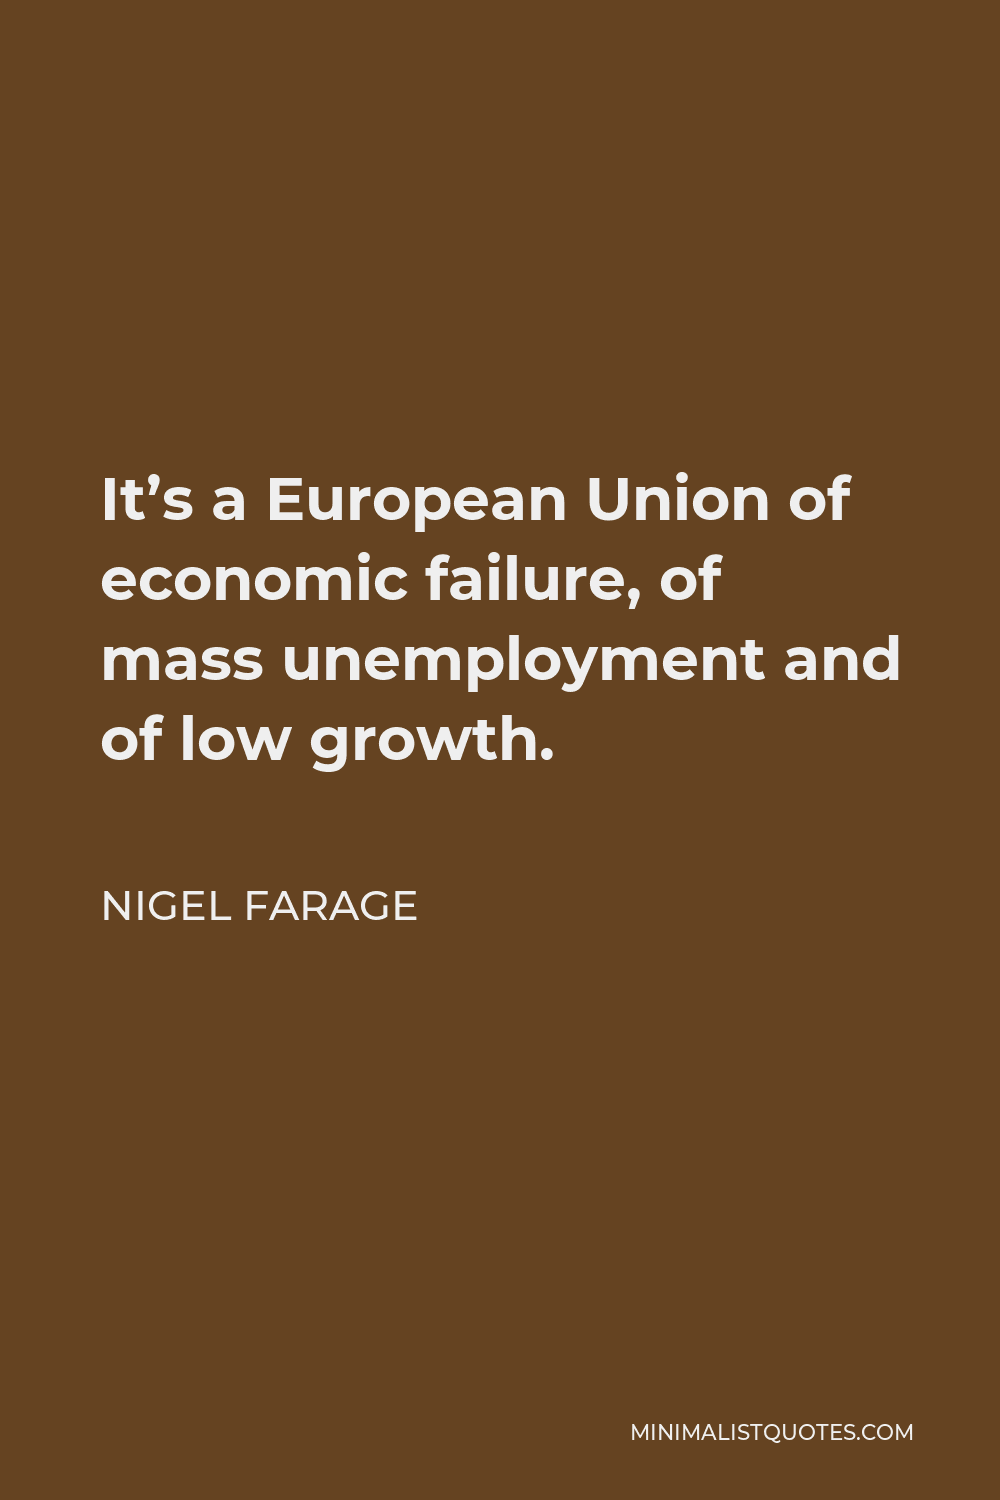 Nigel Farage Quote - It’s a European Union of economic failure, of mass unemployment and of low growth.